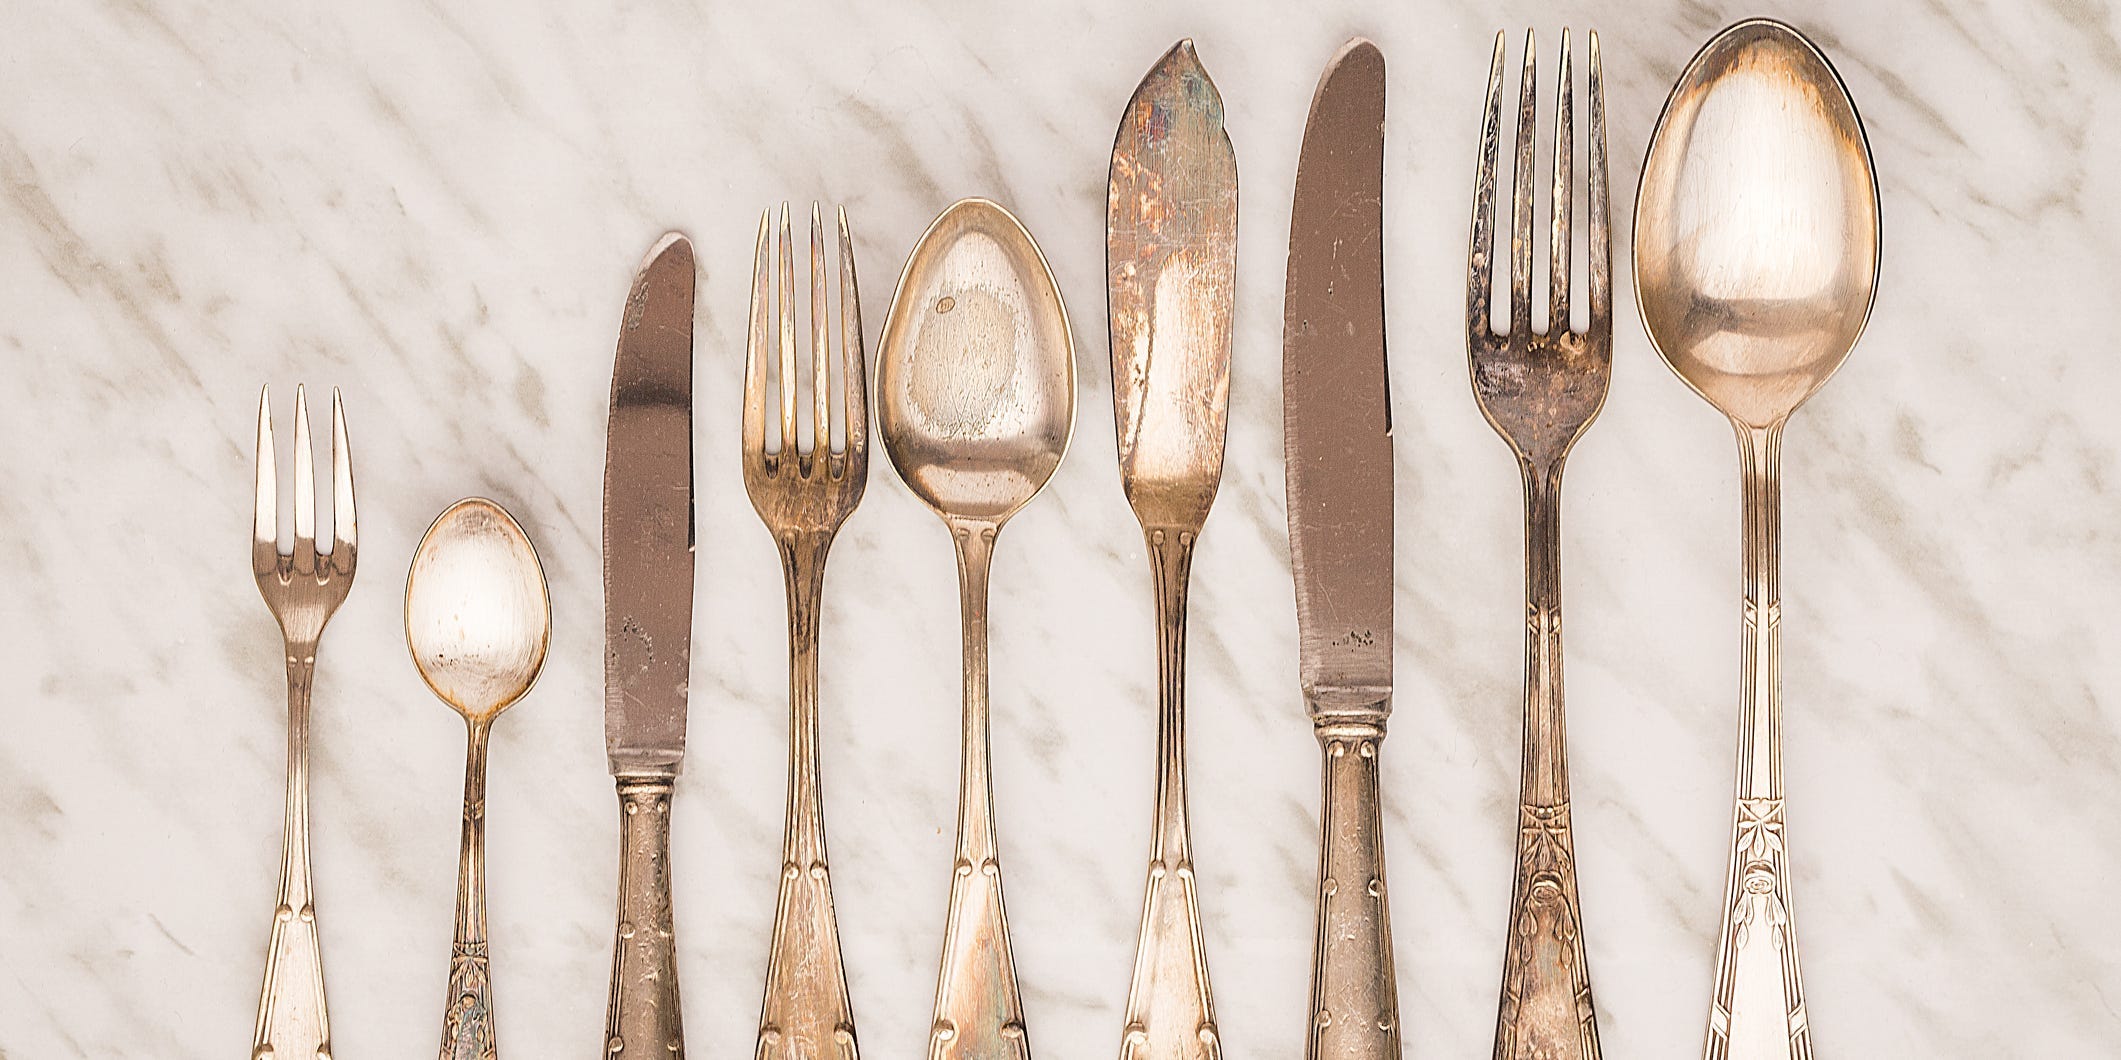 Several tarnished silver forks, knives, and spoons lined up in size order